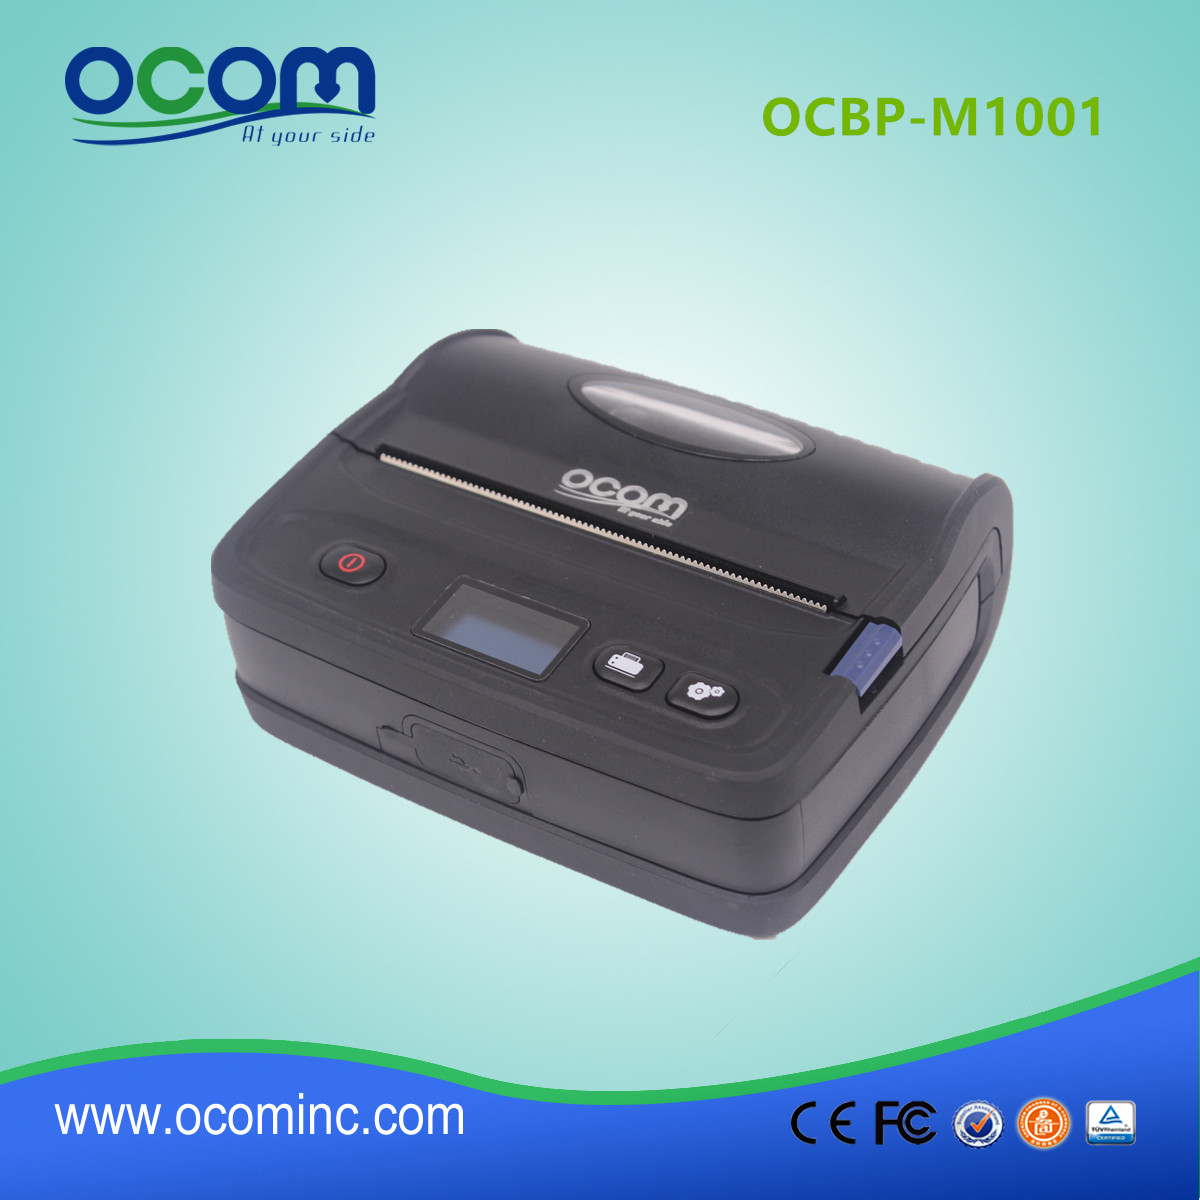 OCBP-M1001 High Quality Compact Bluetooth Thermal Receipt&label Printer